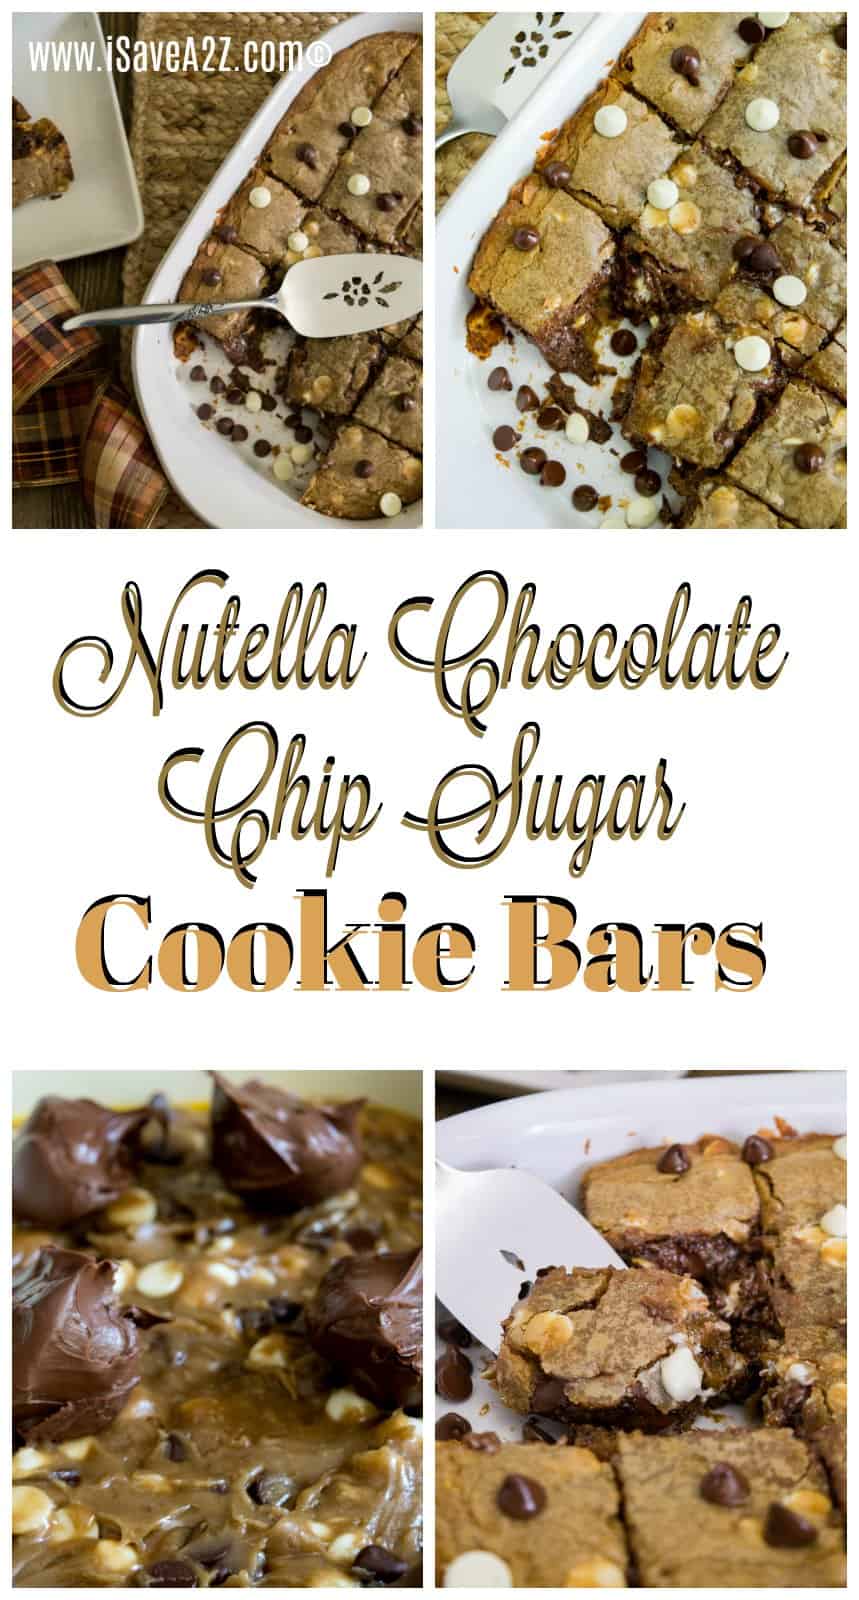 Double Chocolate Chip Cookies Bar Recipe